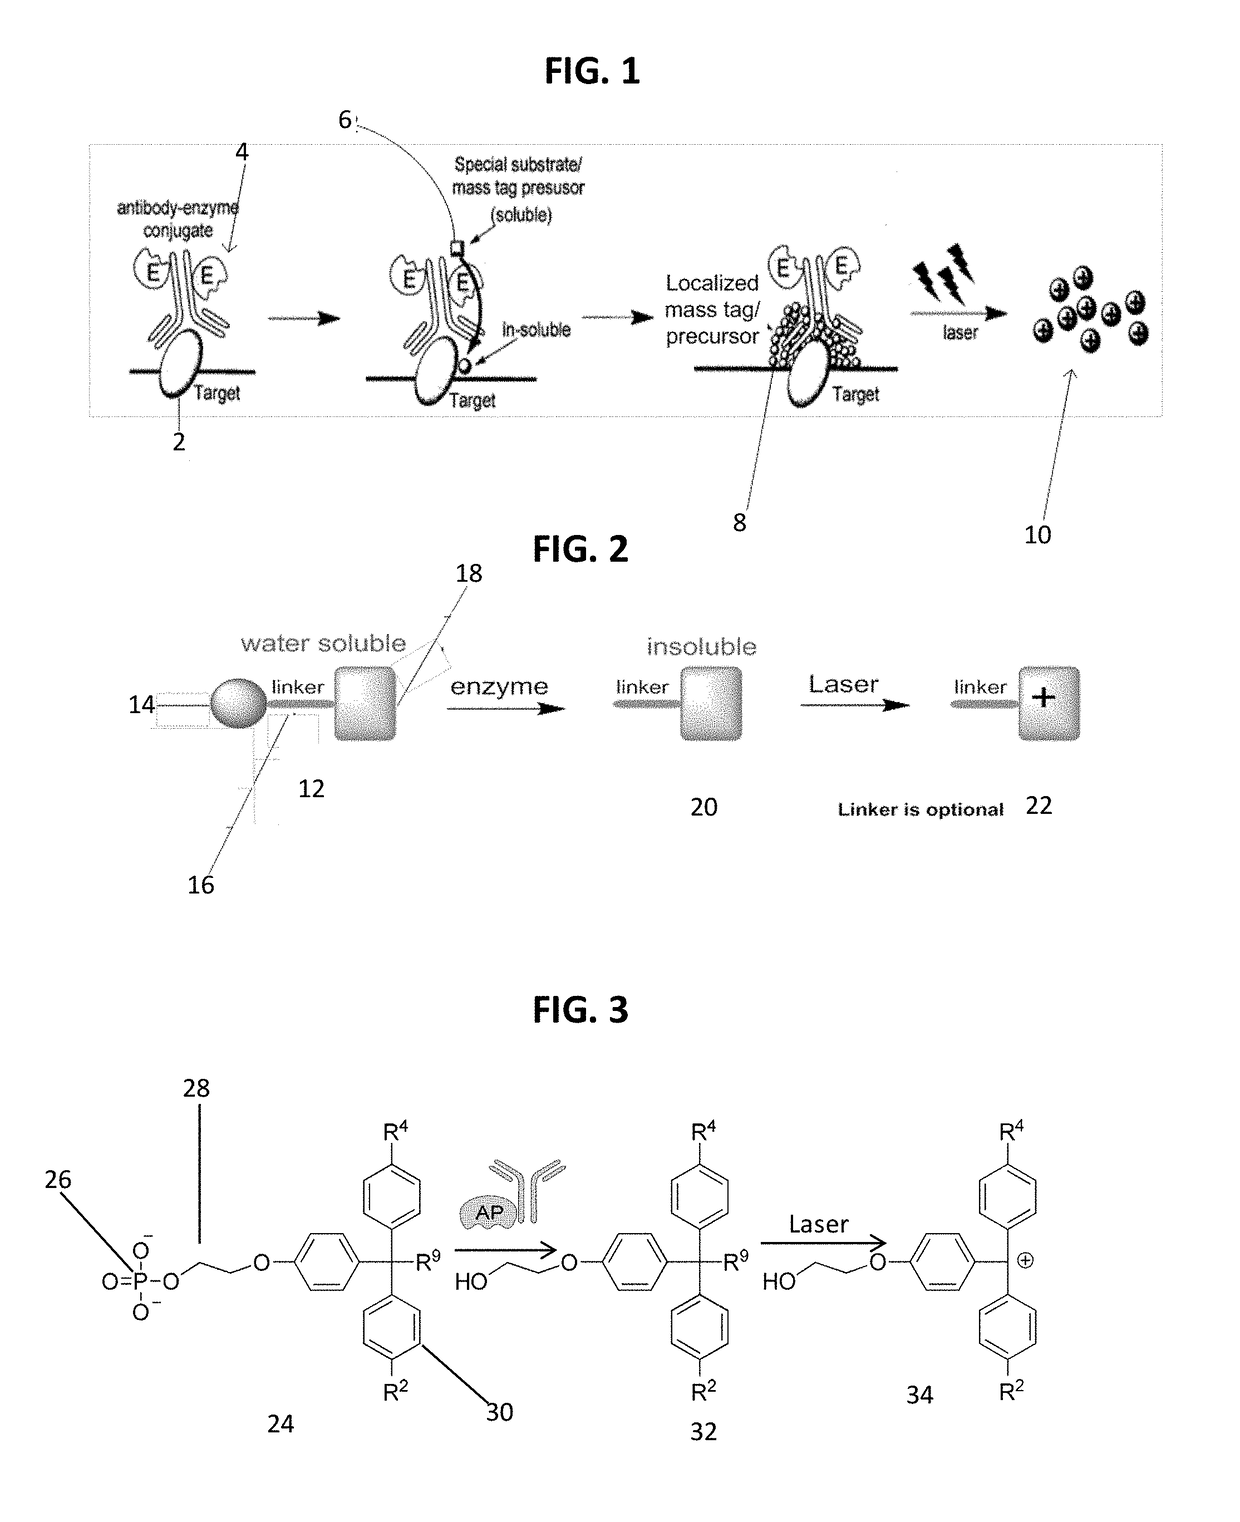 Detecting targets using mass tags and mass spectrometry